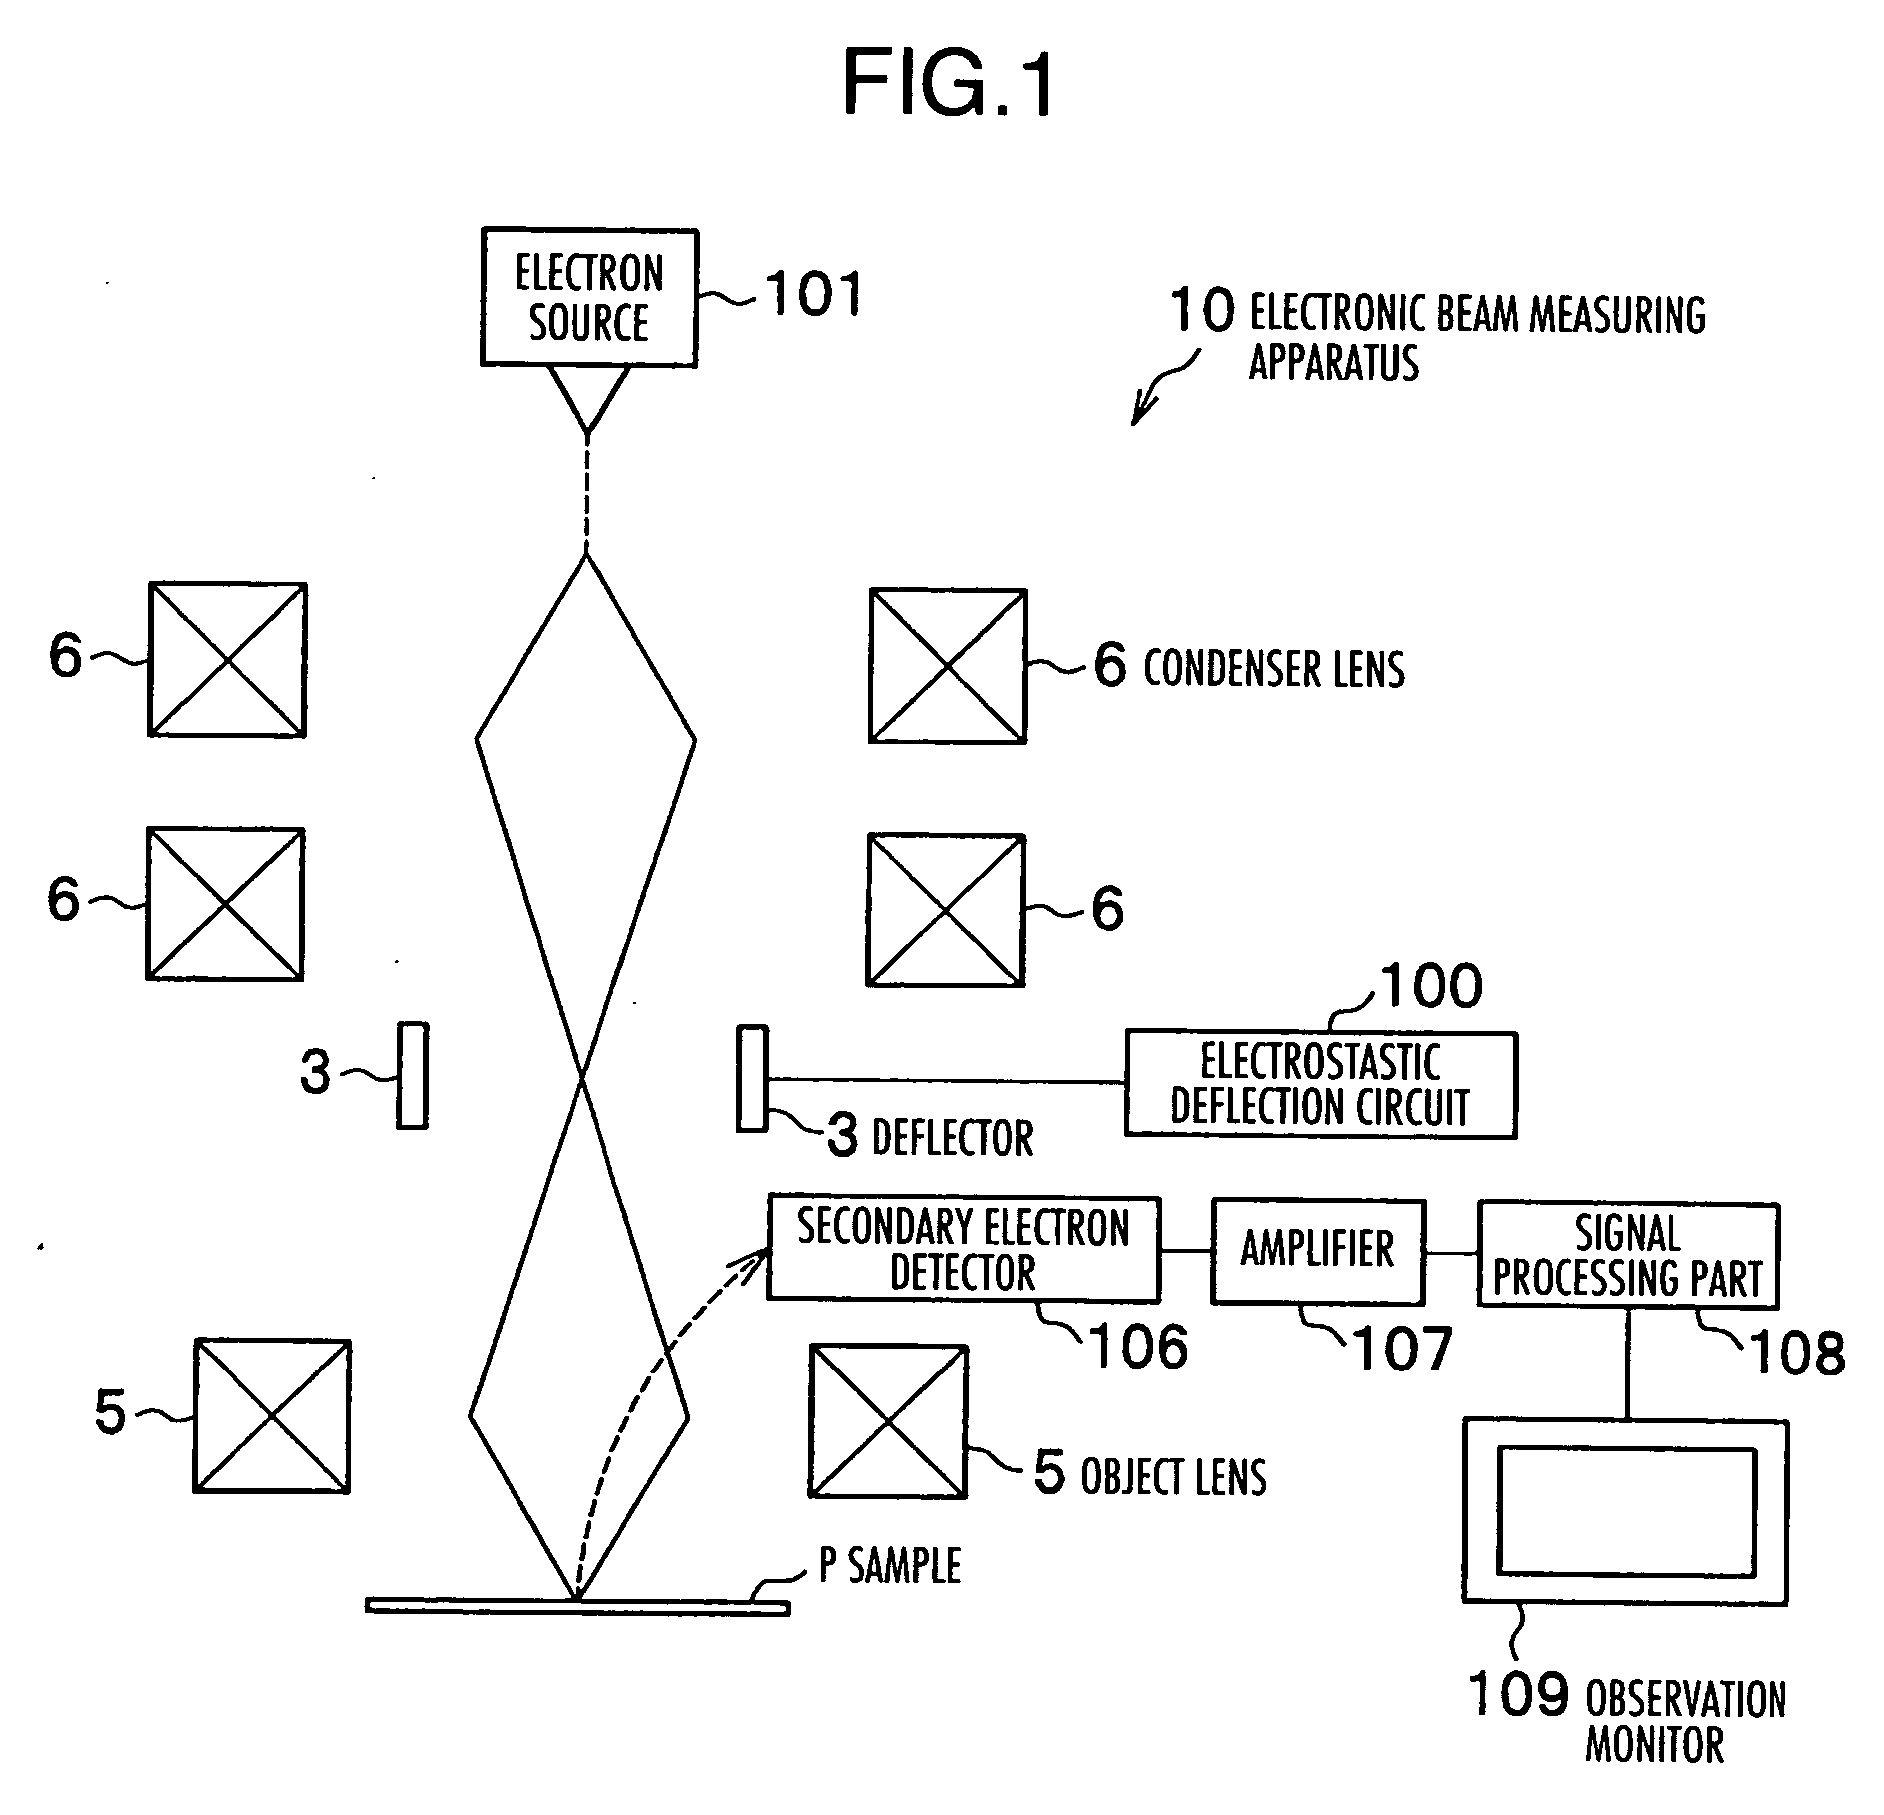 Electrostatic deflection control circuit and method of electronic beam measuring apparatus